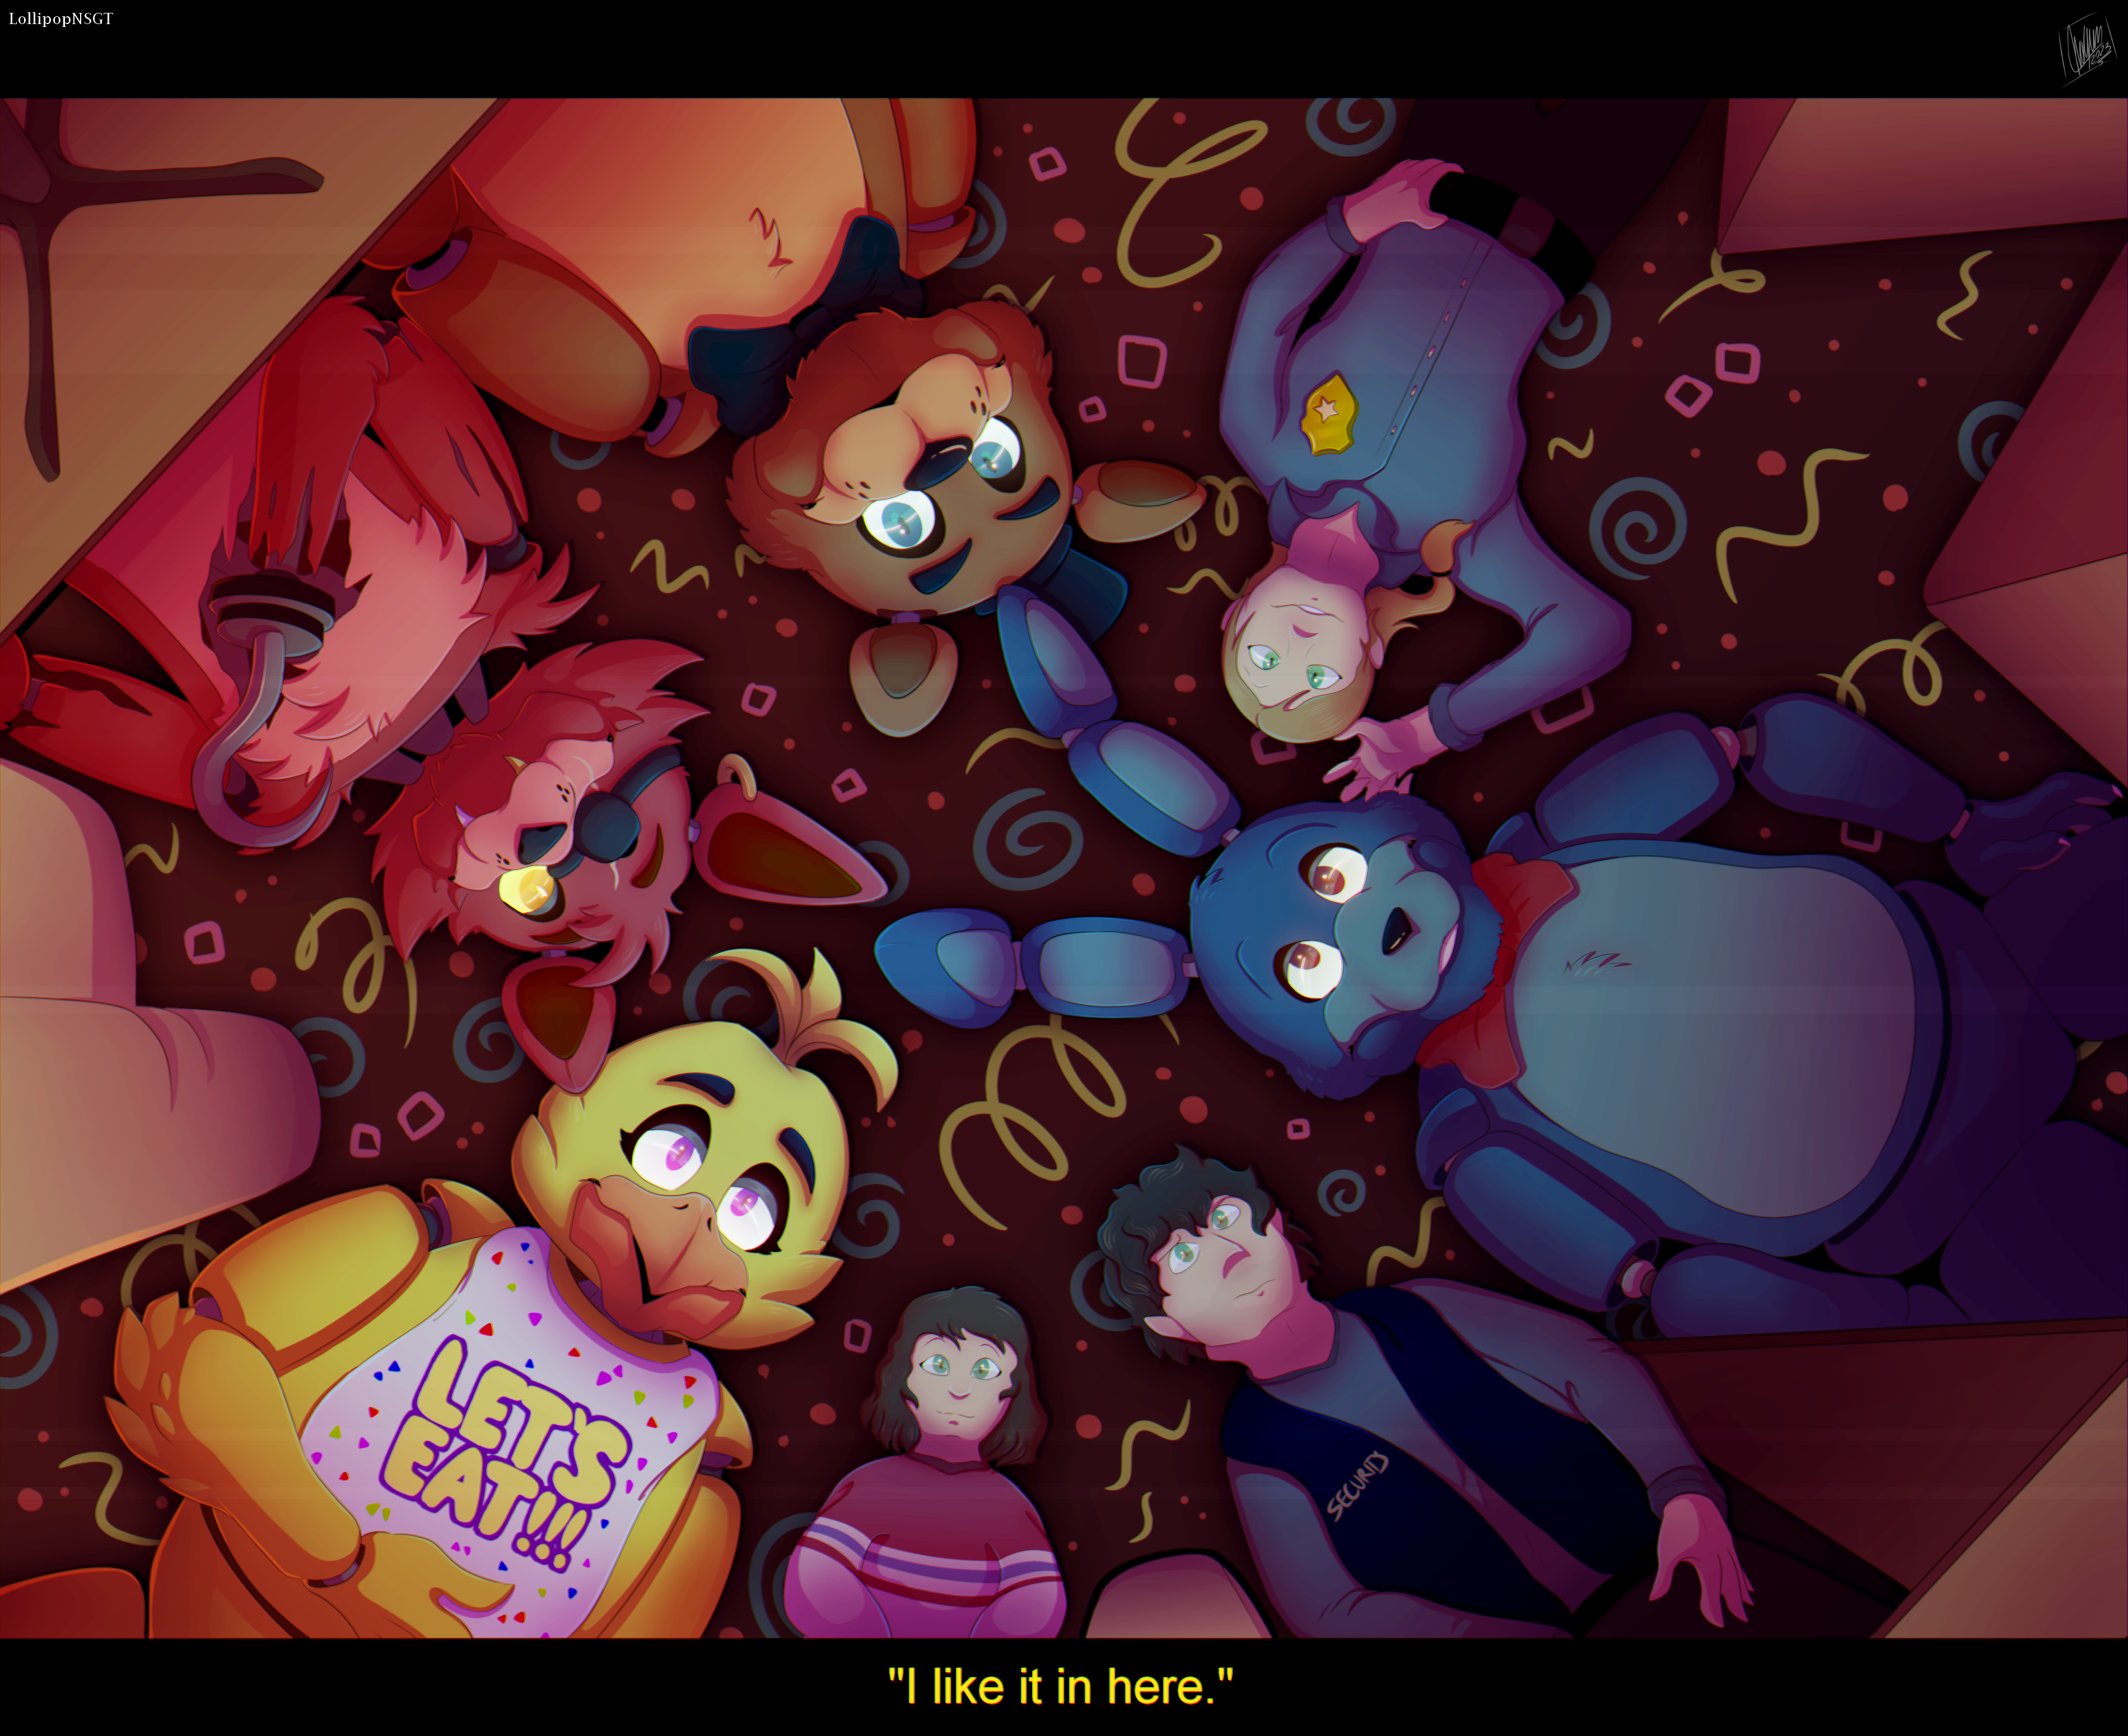 Fnaf 3 takes place in 2023 by beny2000 on DeviantArt